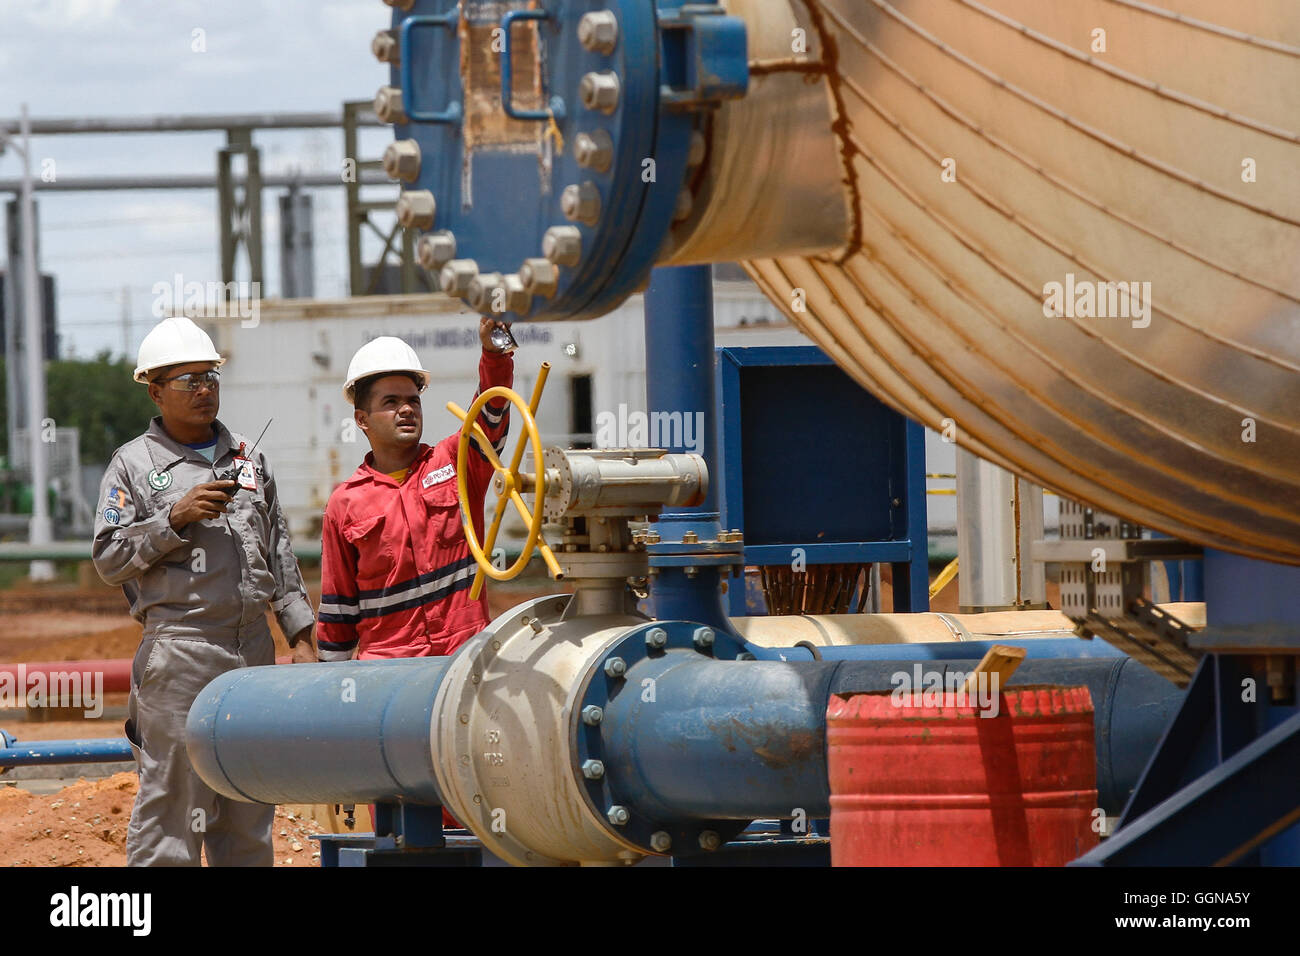 Monagas. 4th Aug, 2016. Photo taken on Aug. 4, 2016 shows workers of the state-owned Venezuelan oil company Petroleos de Venezuela (PDVSA) working at the facilities of the Chinese-Venezuelan joint company SINOVENSA S.A. in the Orinoco Petroleum Belt in Monagas state, Venezuela. State-run oil companies of Venezuela and China are joining hands to boost oil output from the Orinoco oil belt in southeastern Venezuela, which boasts one of the world's largest oil reserves. © Boris Vergara/Xinhua/Alamy Live News Stock Photo